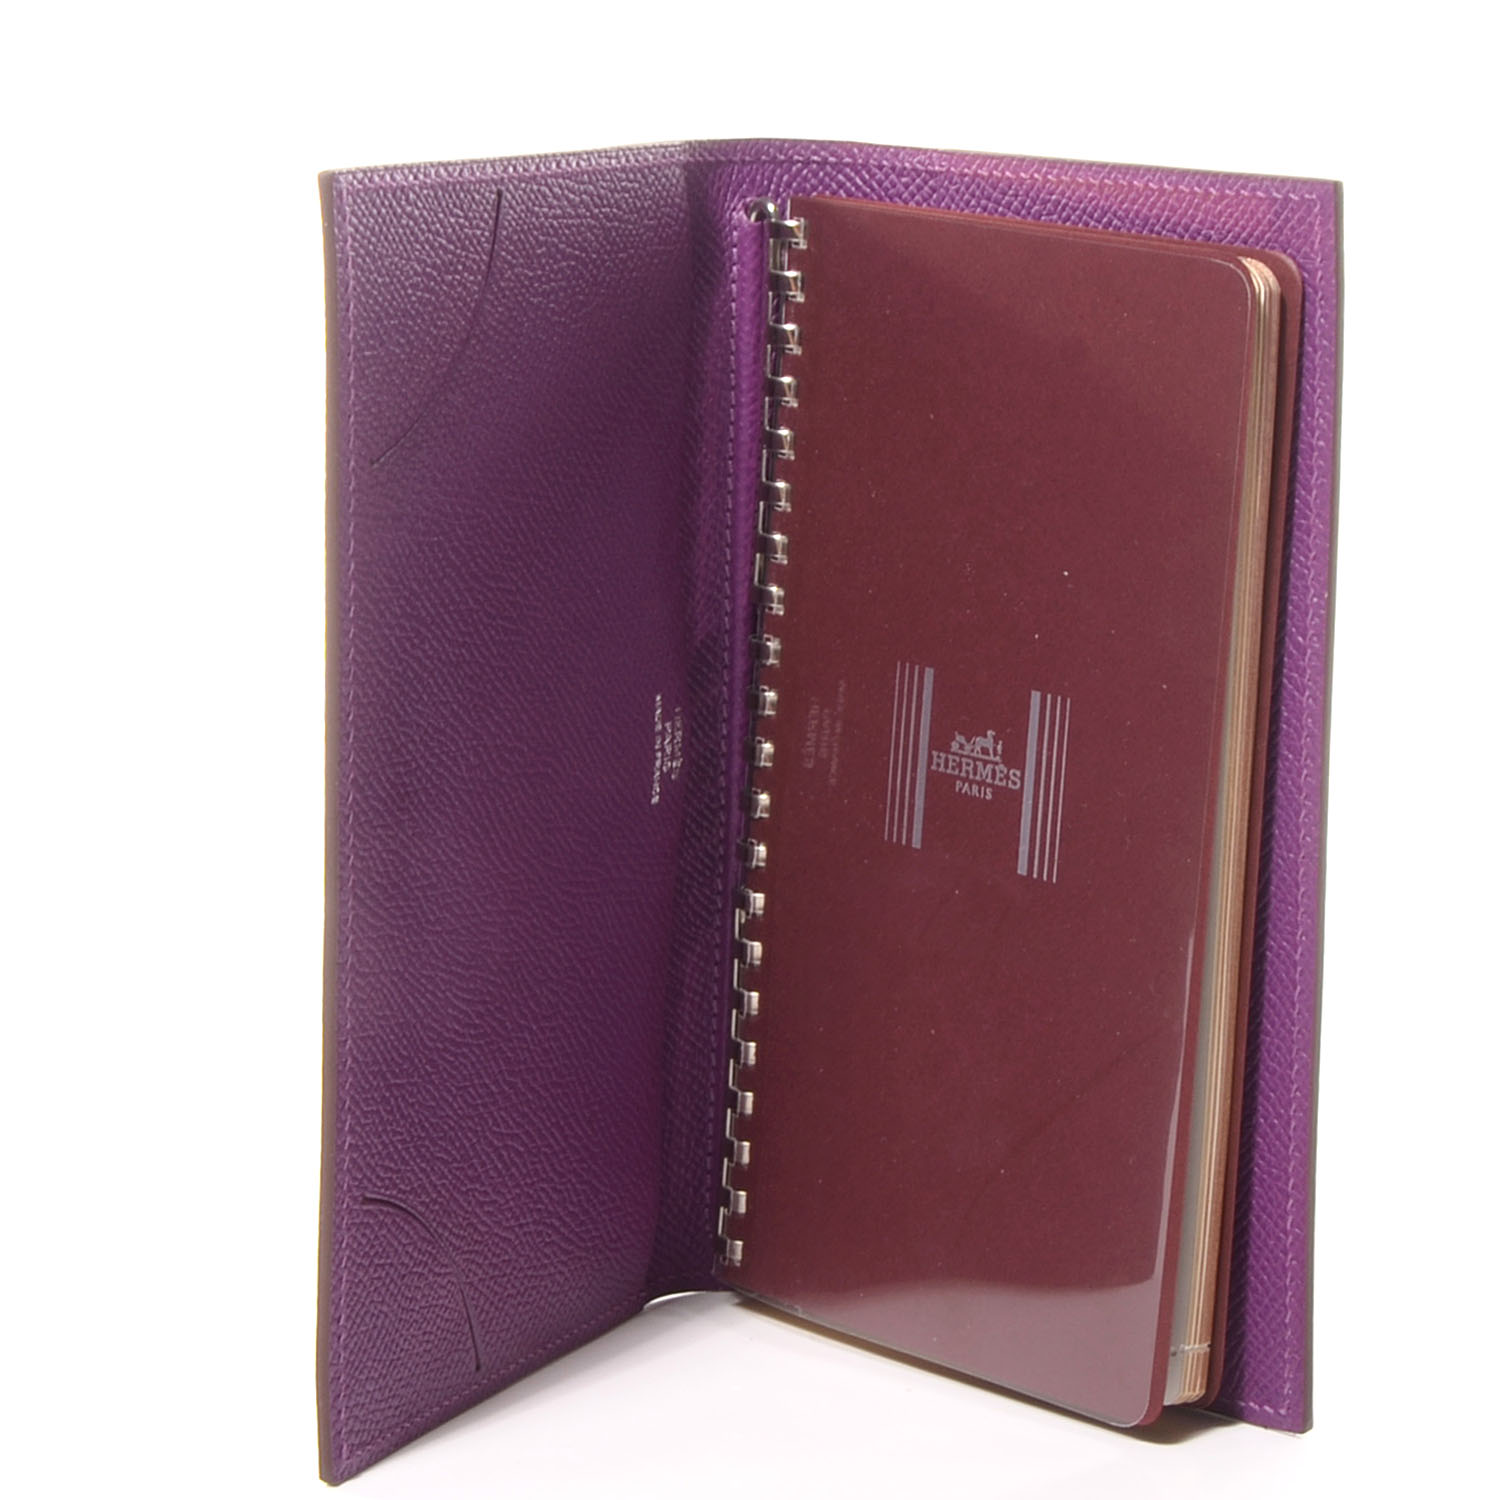 HERMES Epsom Vision II Agenda Cover with Refill Cyclamen 66943